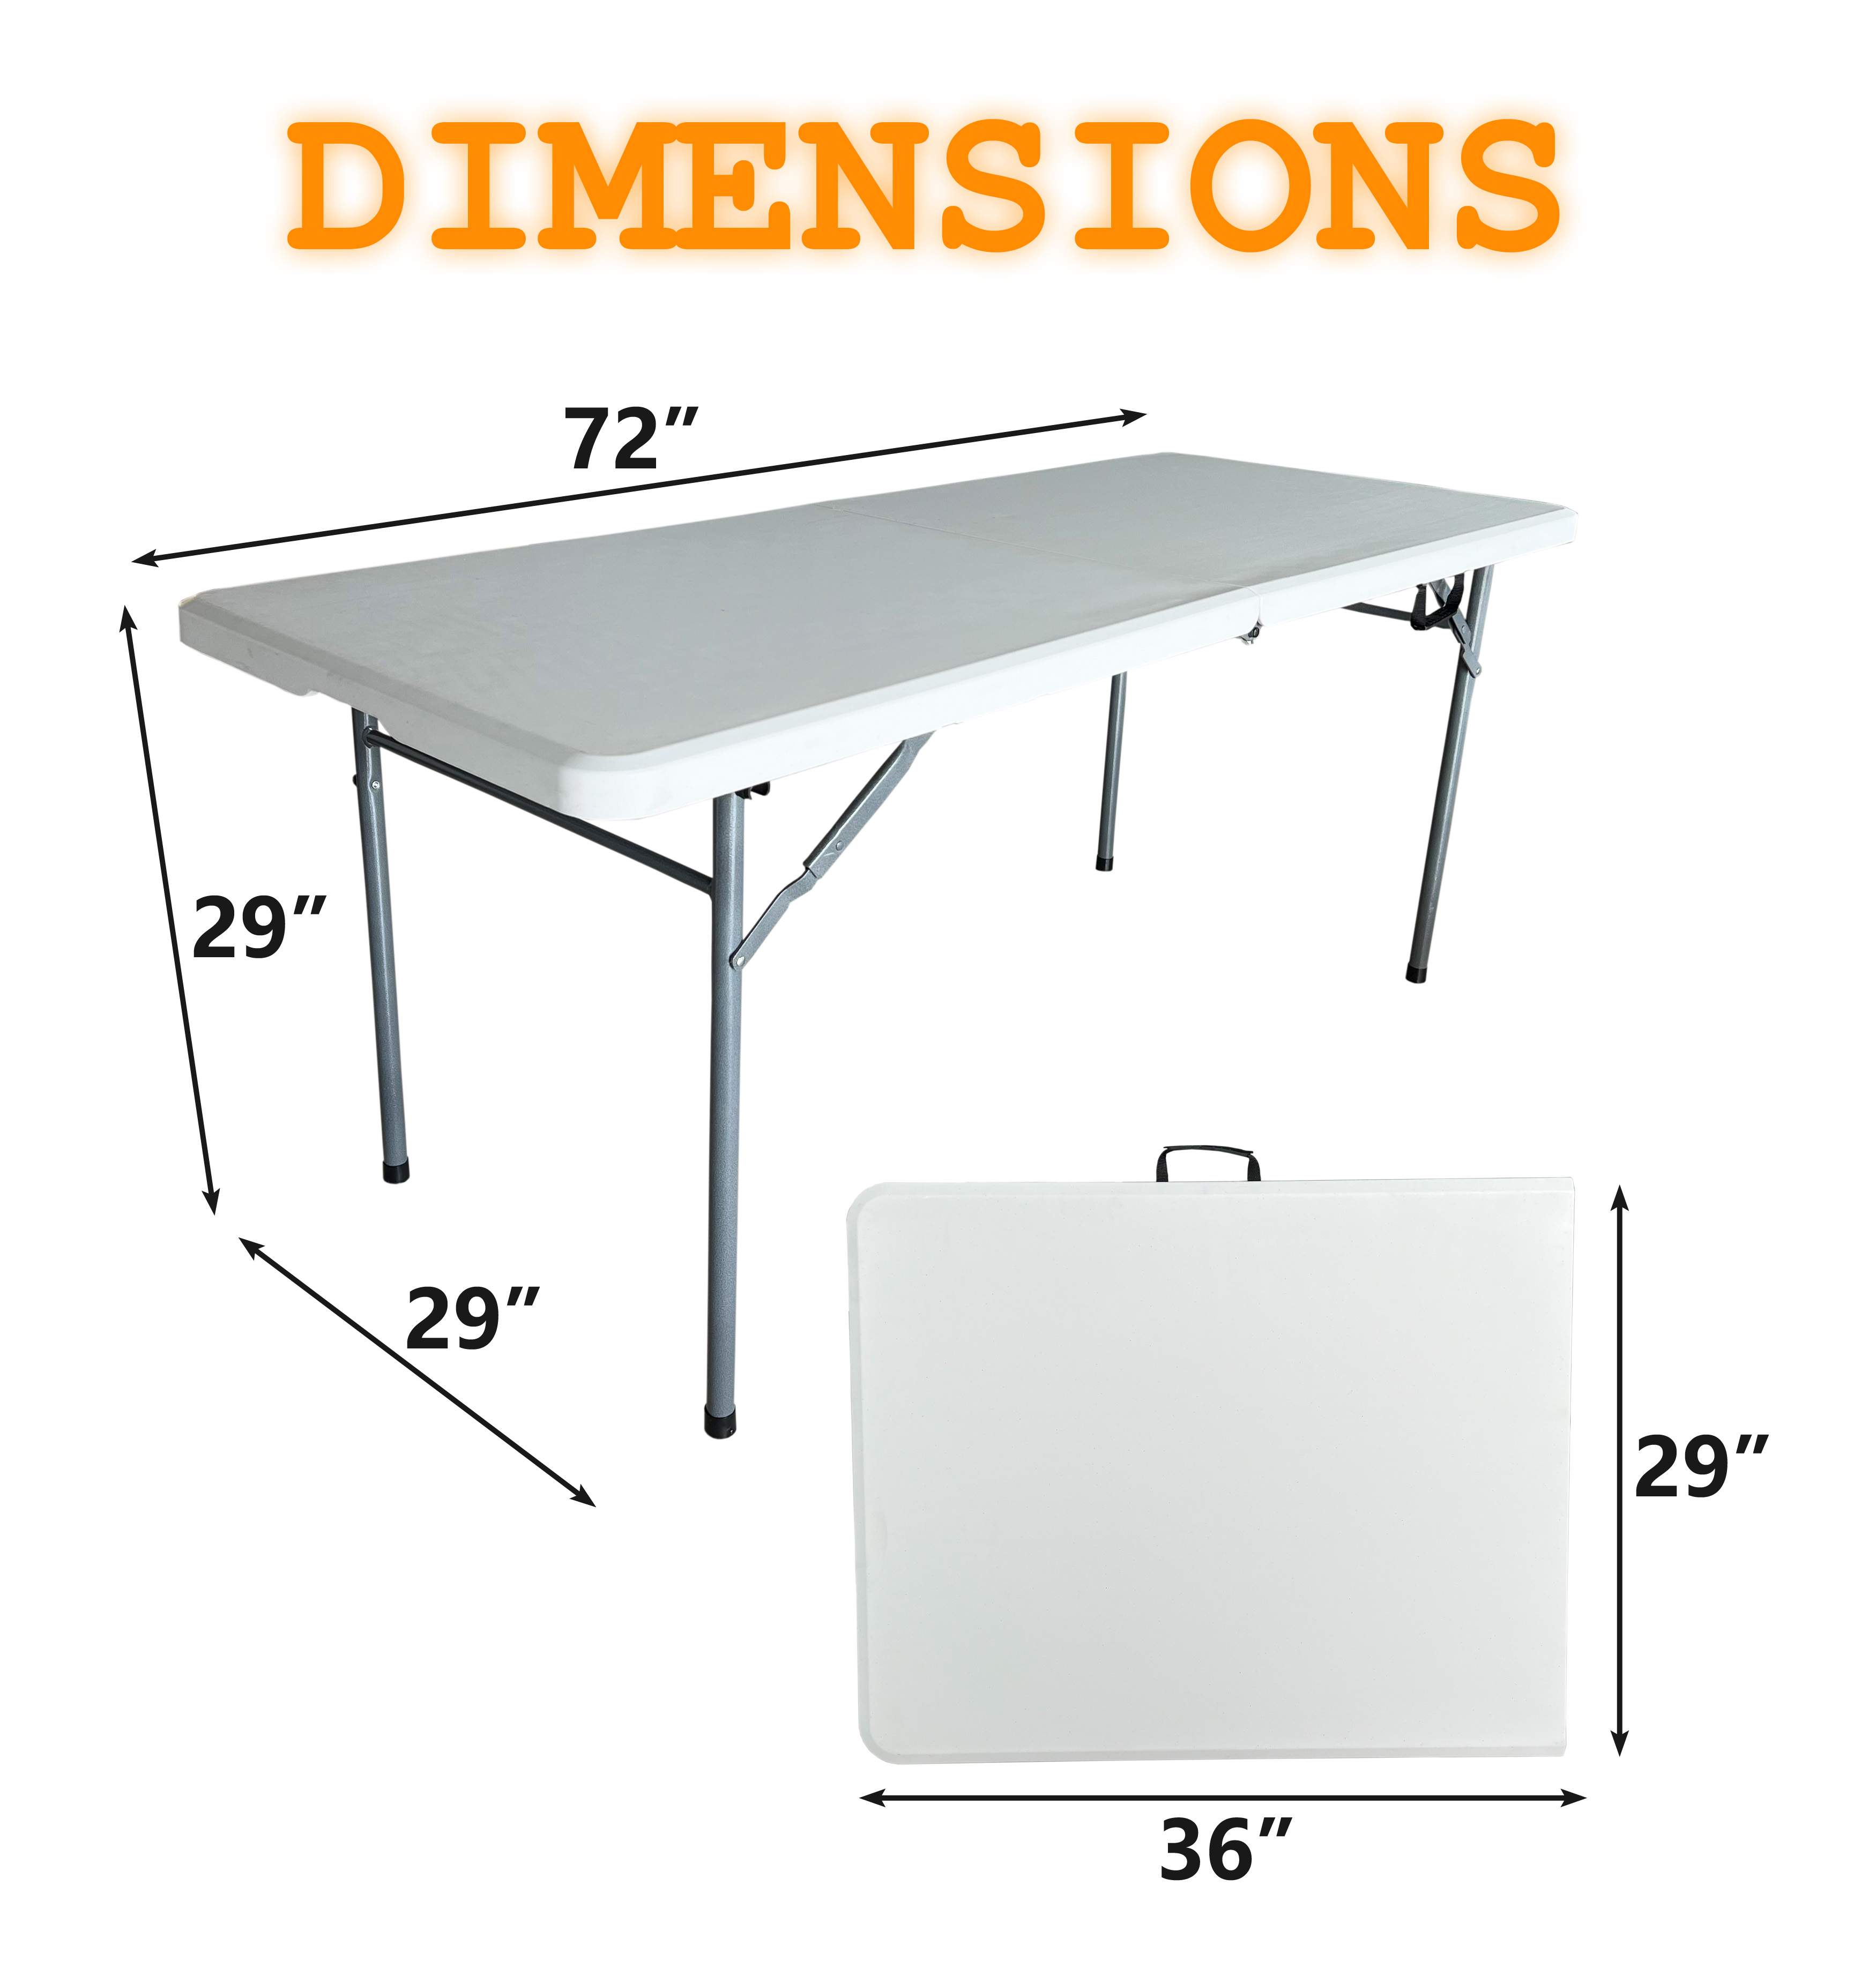 Kumji 6FT Commercial Grade Folding Table, Portable, Heavy-Duty, Indoor & Outdoor for Picnic, Party, Folding Utility Table, Fold-in-Half Portable Plastic Picnic Party Dining Camp Table, White - image 5 of 7